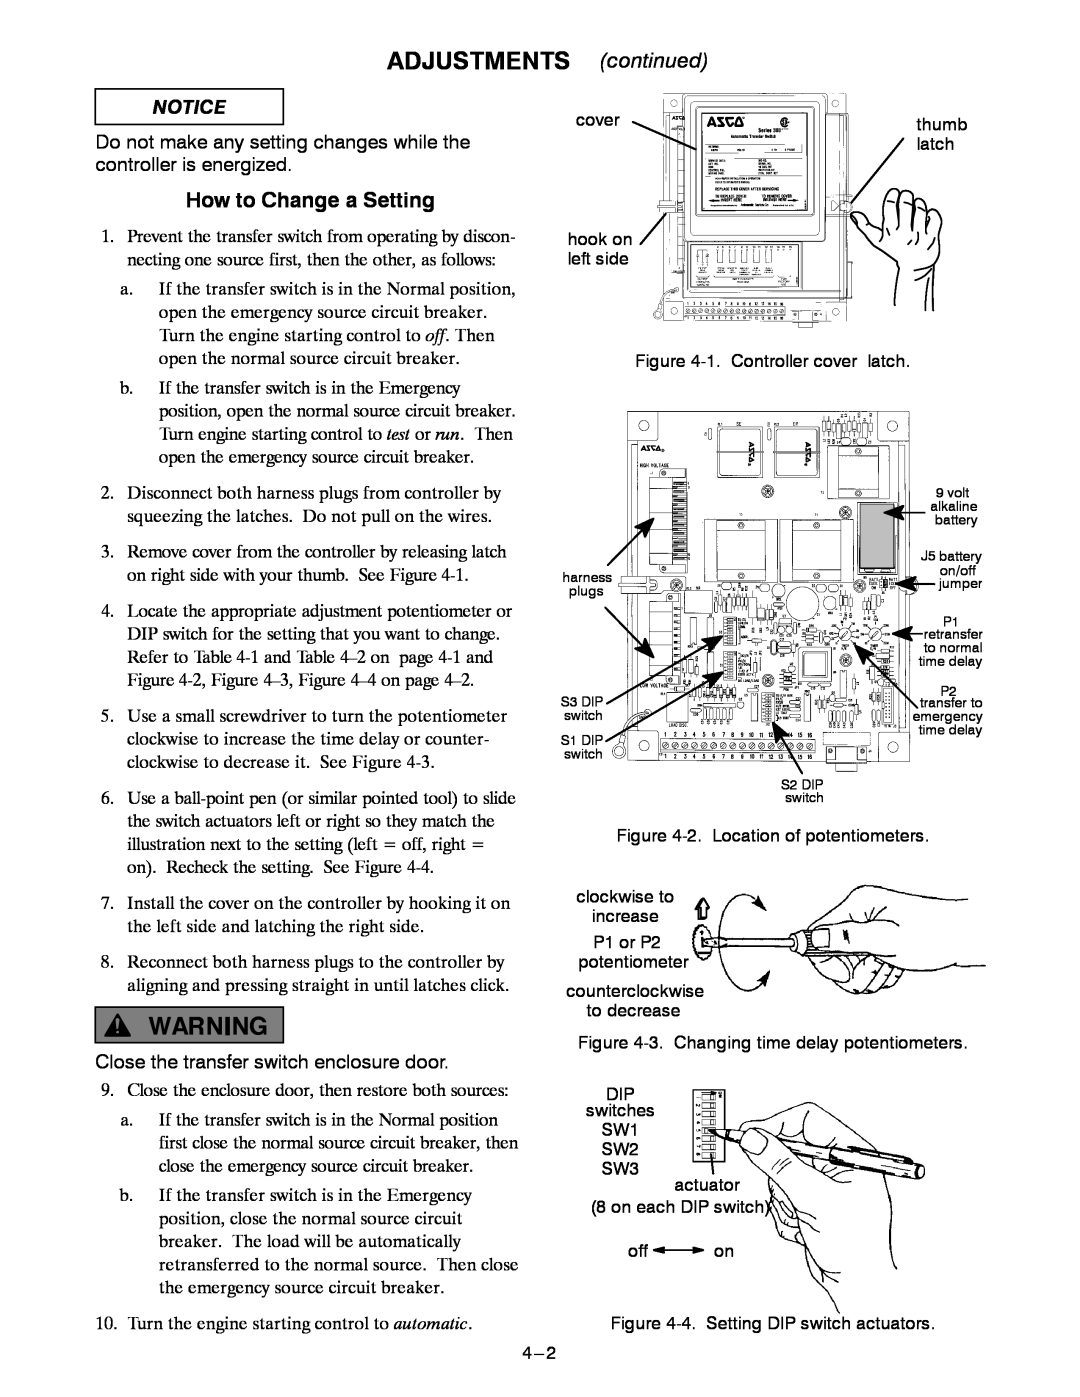 Emerson 300 manual ADJUSTMENTS continued, How to Change a Setting, Close the transfer switch enclosure door 